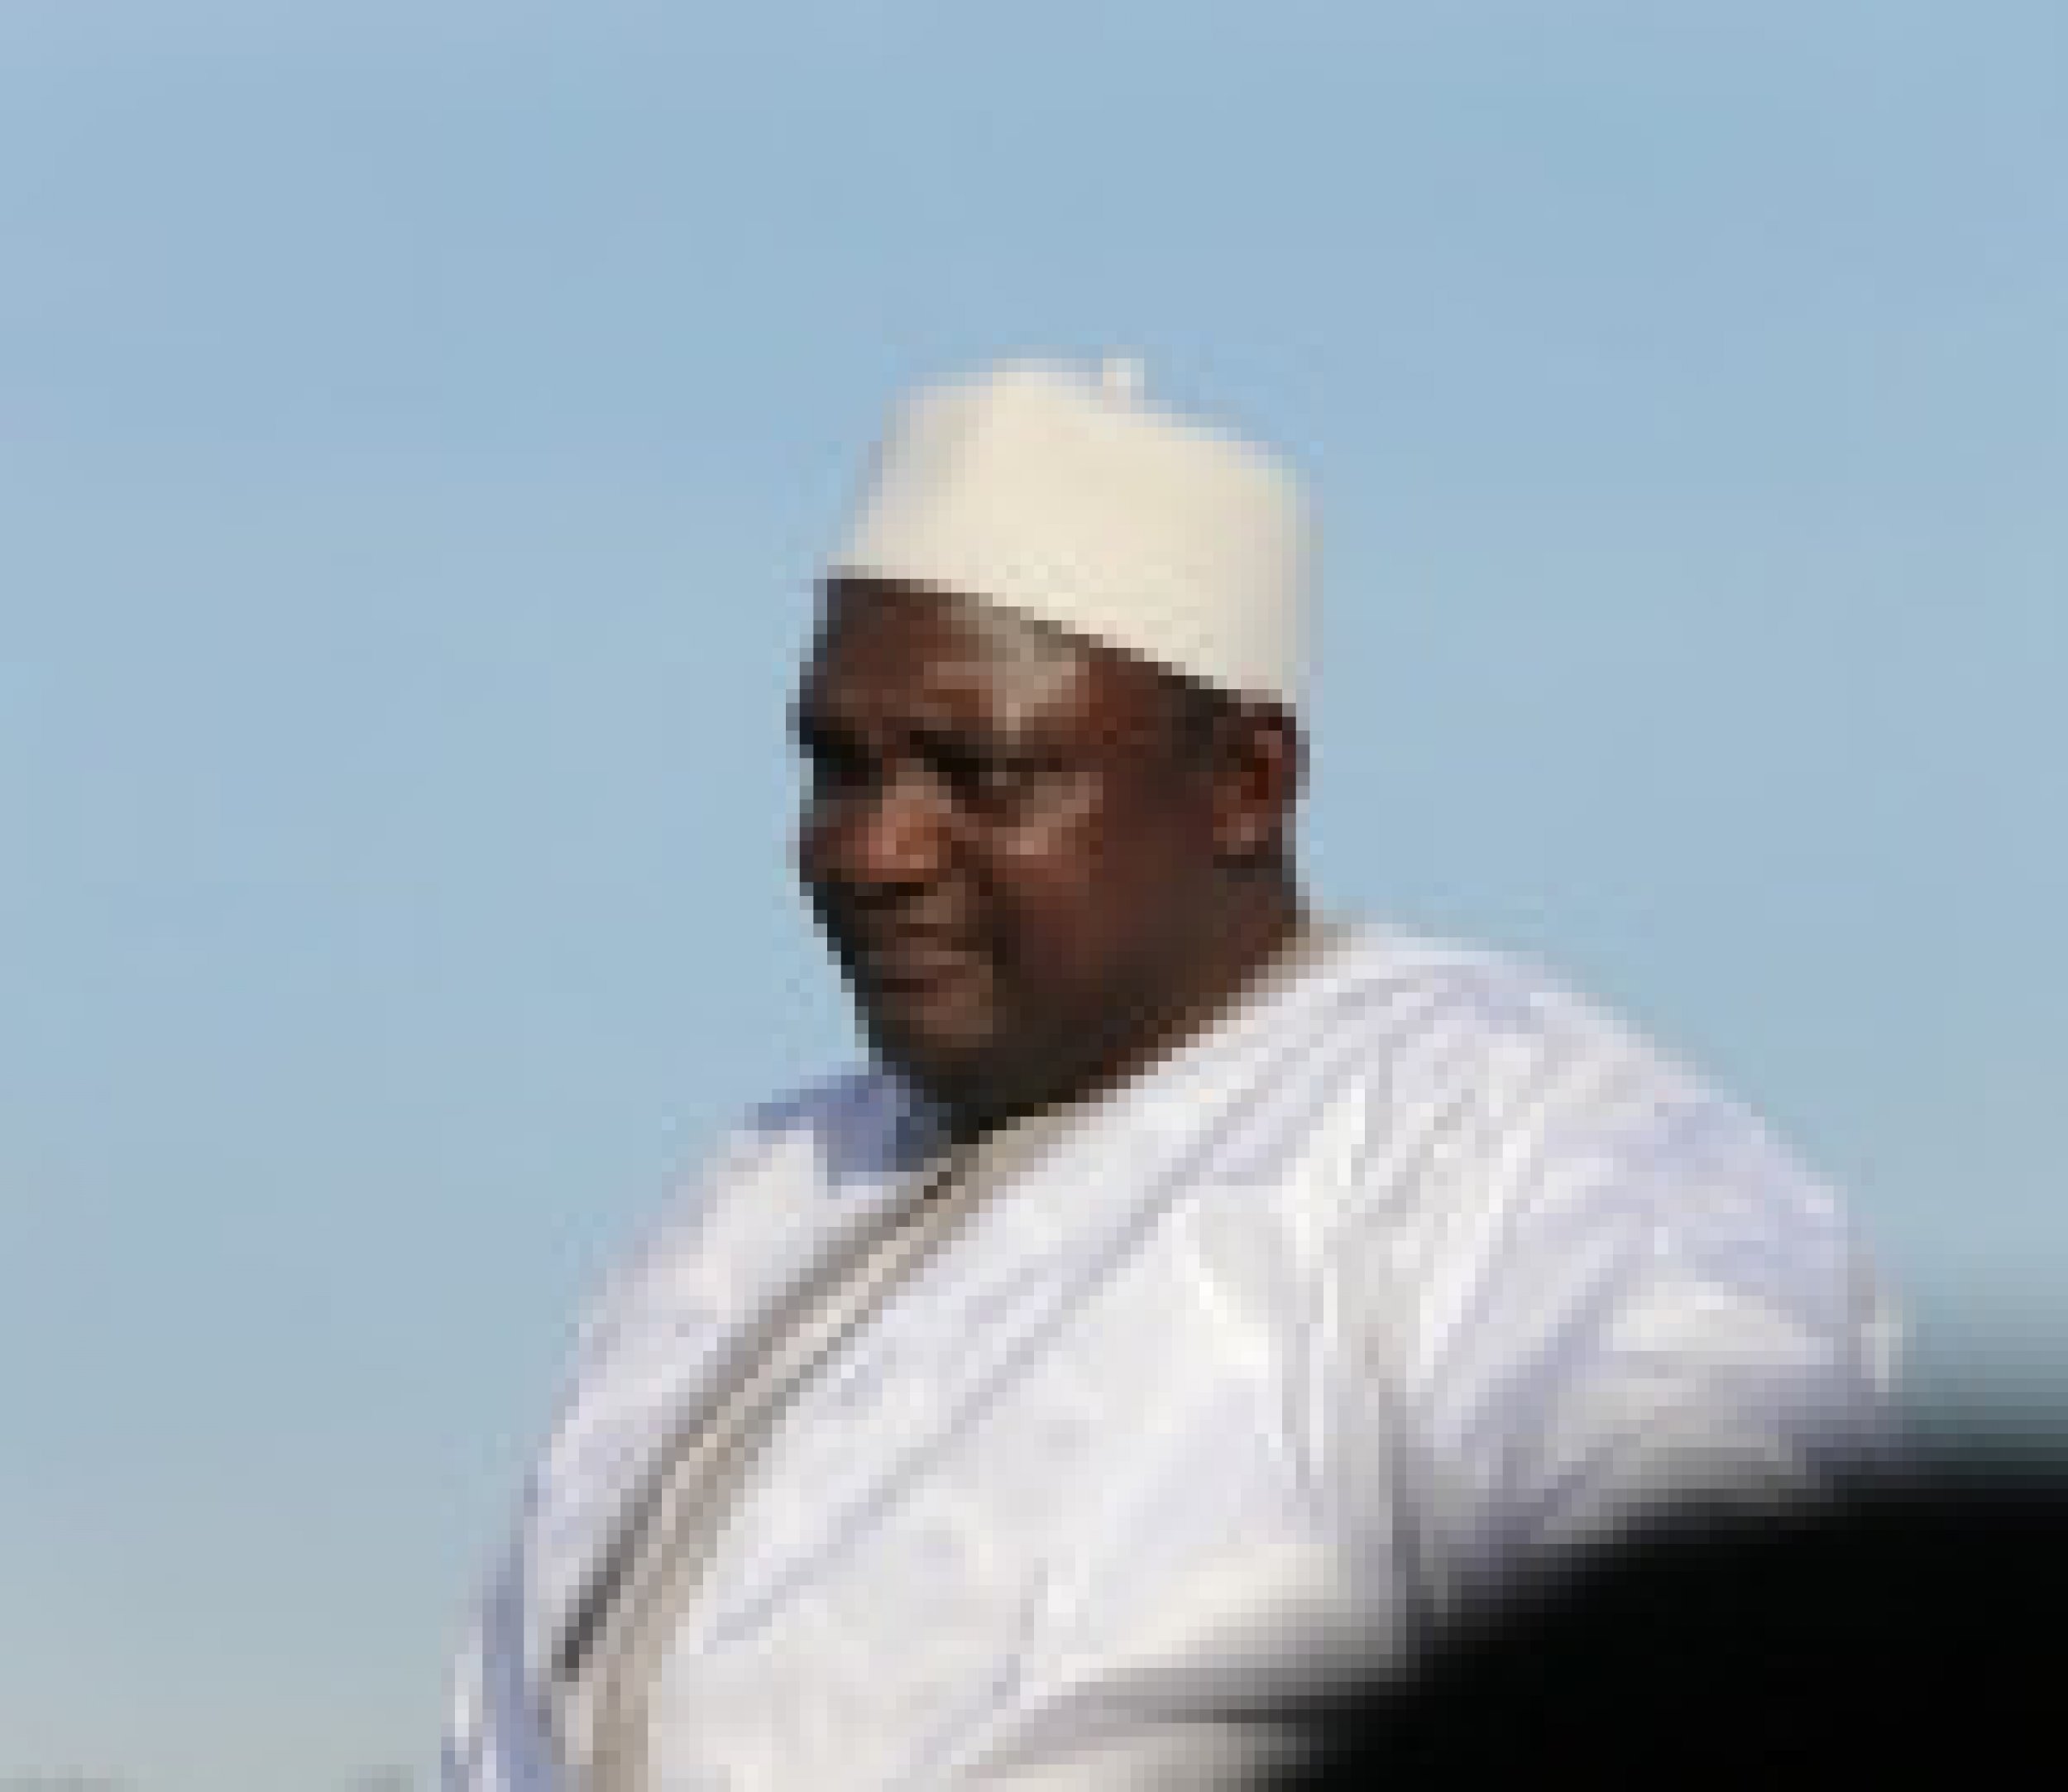 Newly-elected President Adama Barrow returns to Gambia